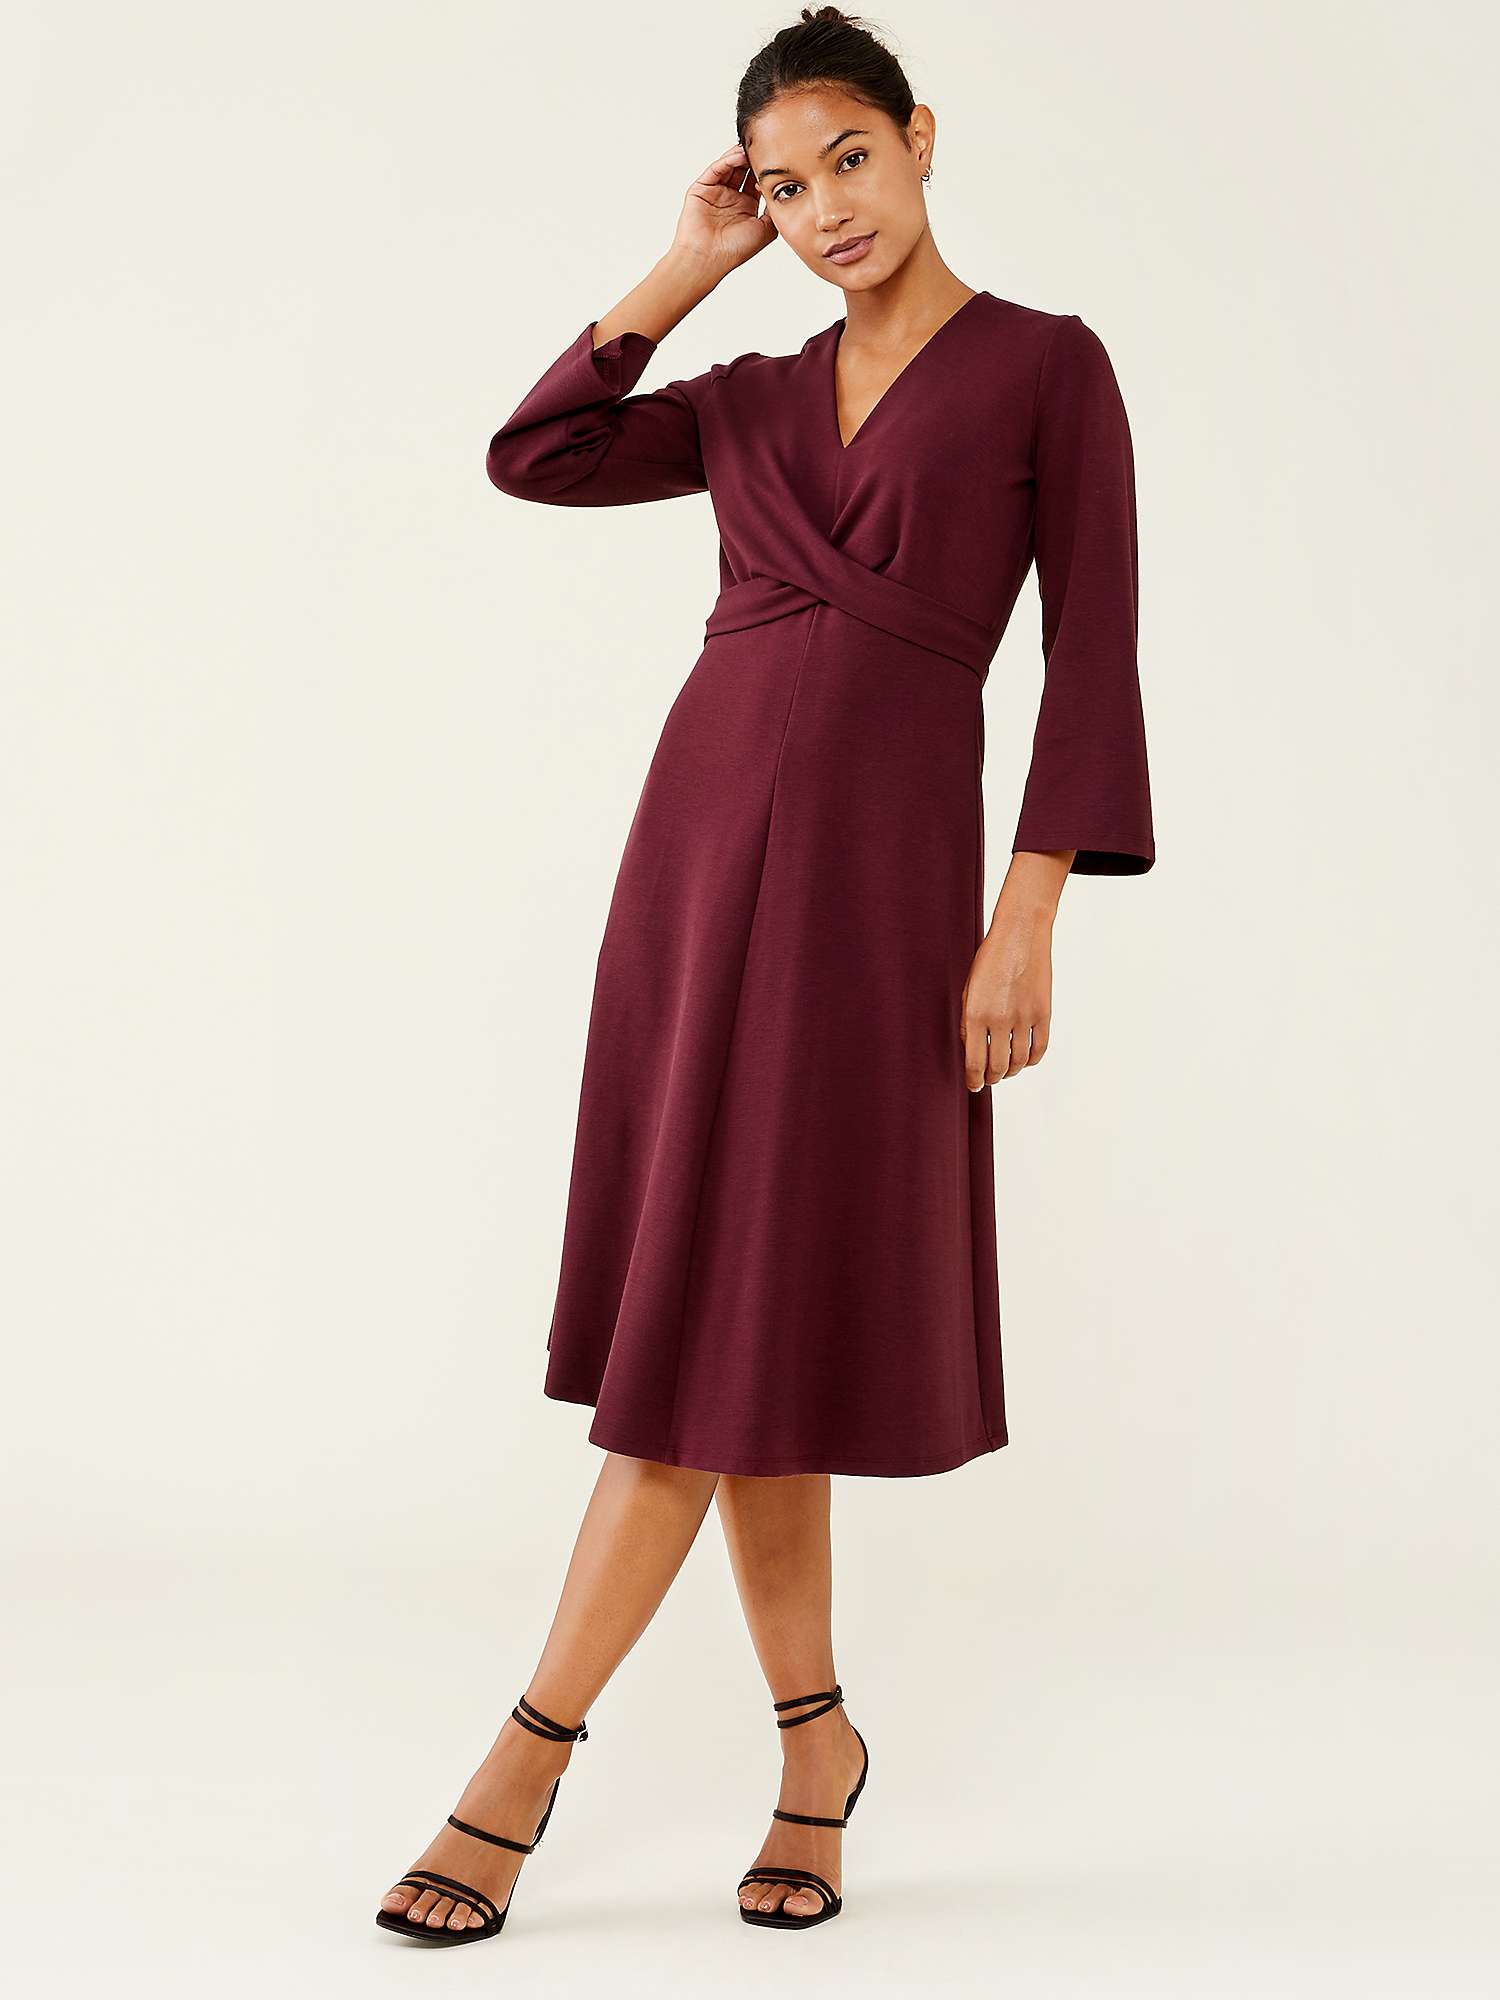 Finery Iona Ponte Jersey Dress, Bordeaux at John Lewis & Partners